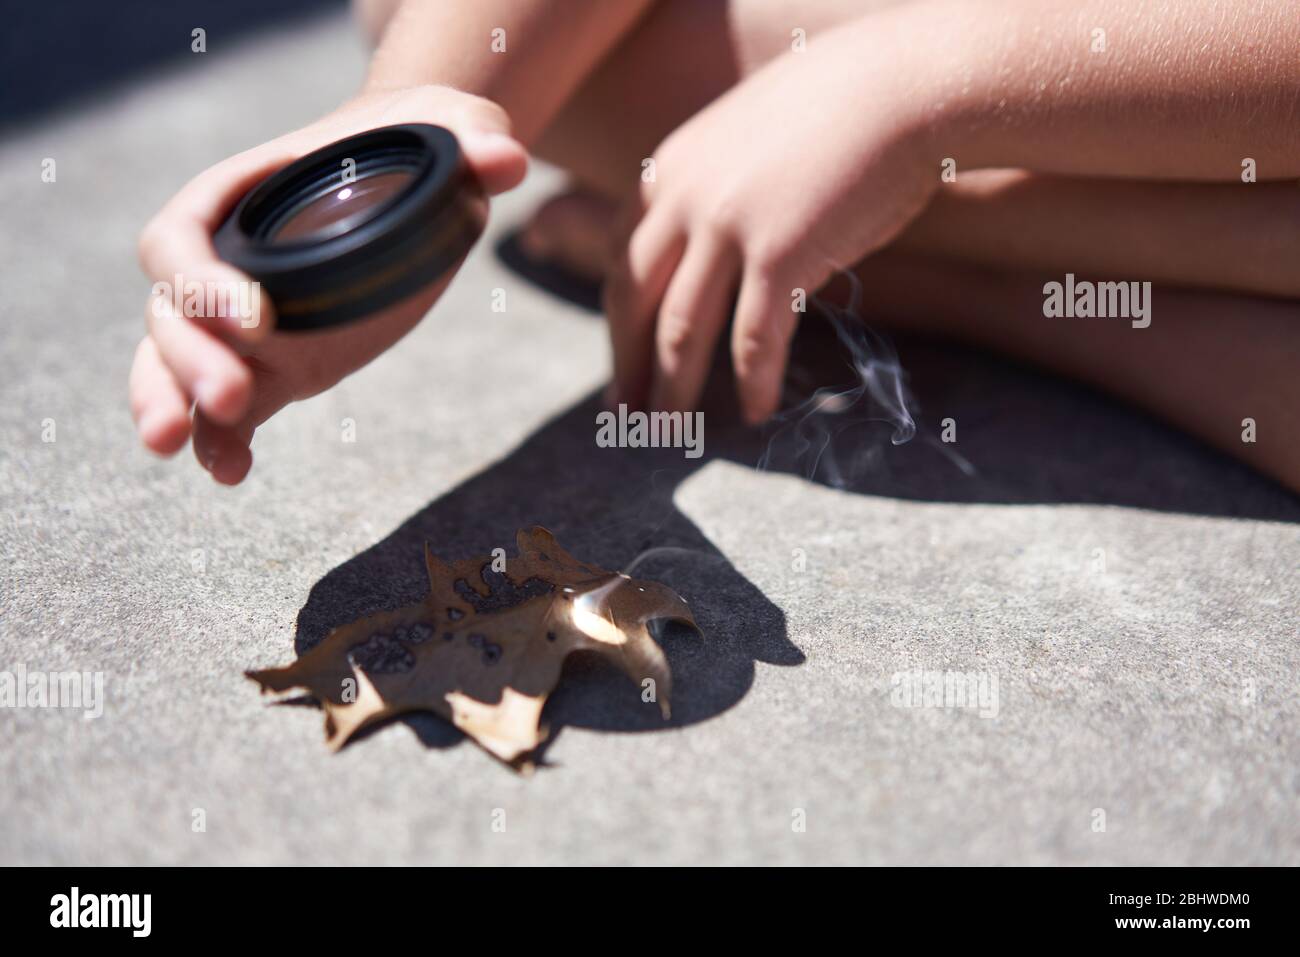 Hands and fingers holding a convex lens and focusing sunlight on leaves causing them to ignite, smoke and burn. Stock Photo